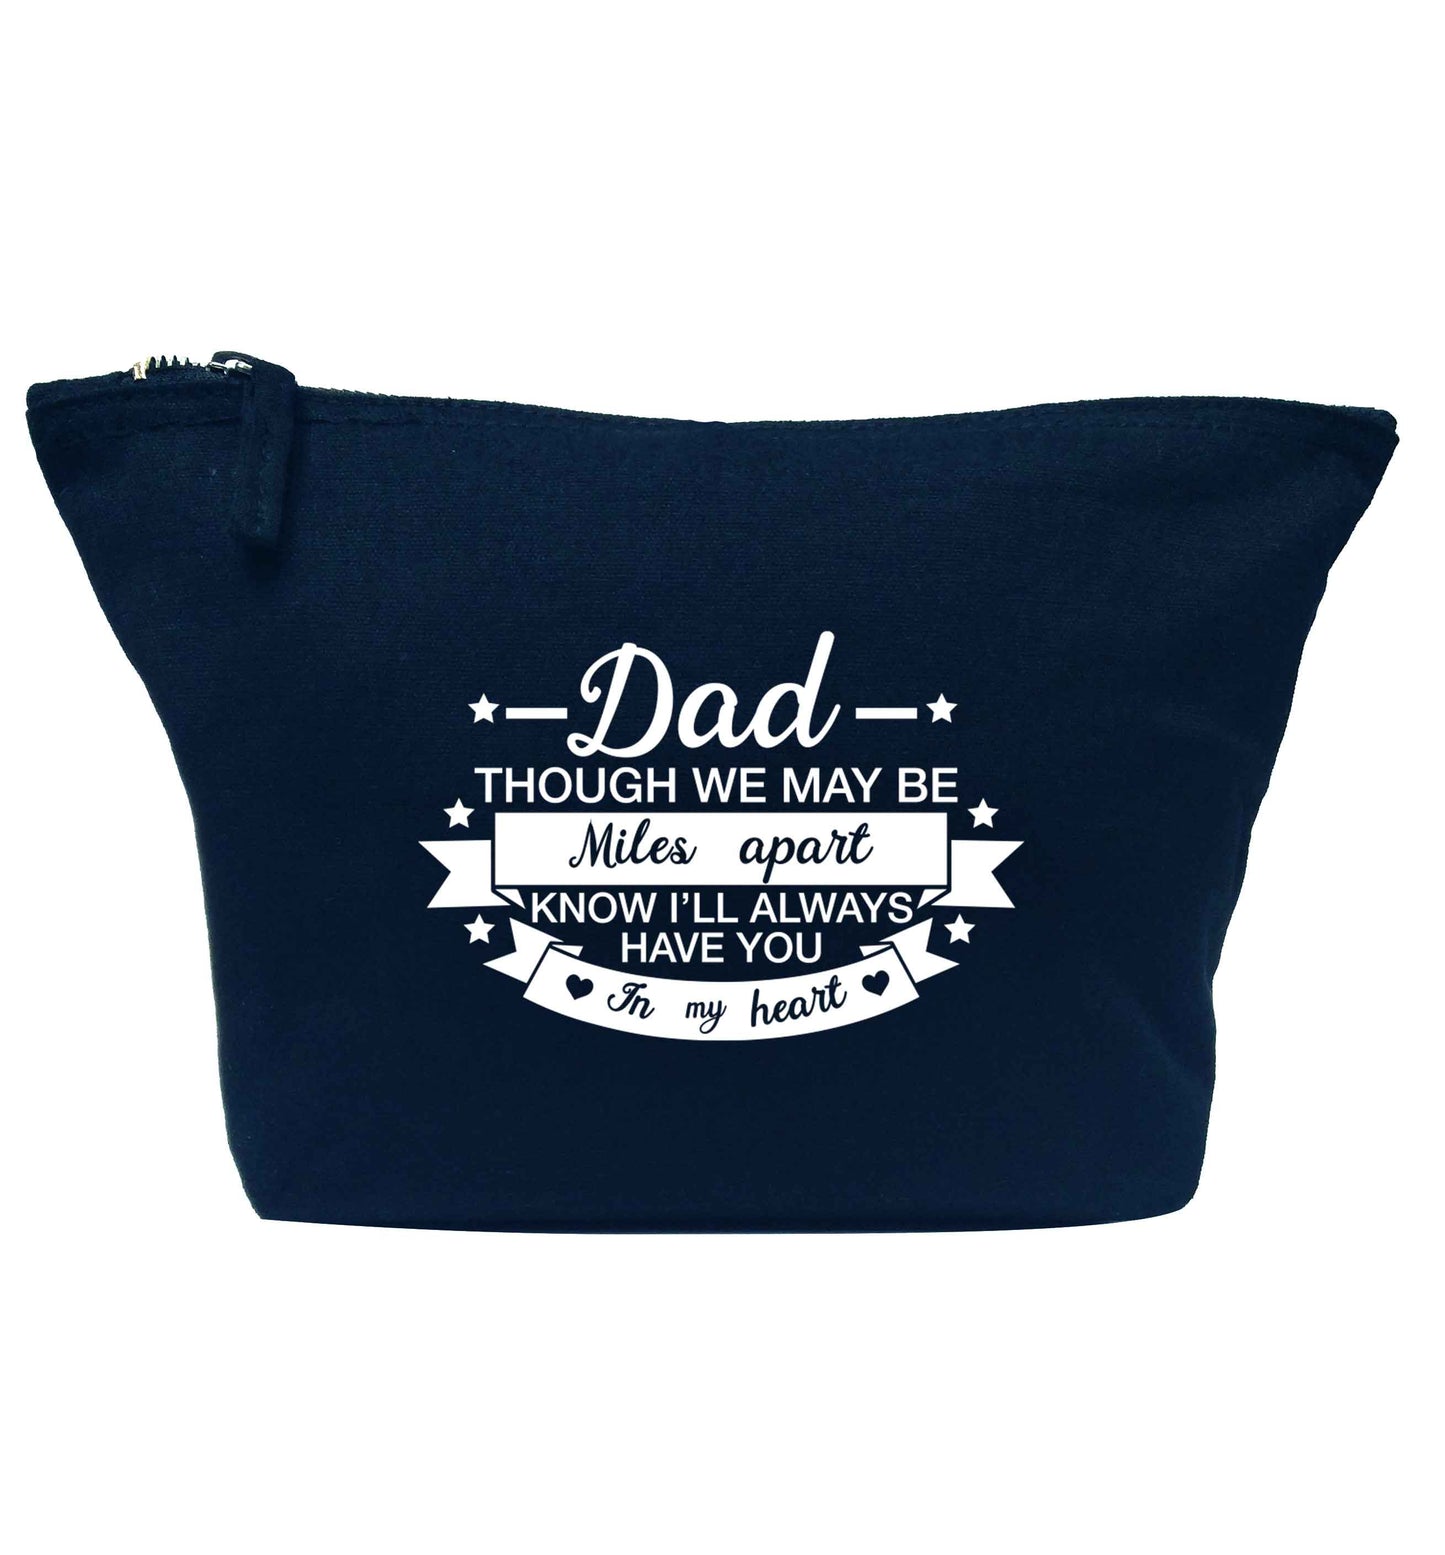 Dad though we are miles apart know I'll always have you in my heart navy makeup bag